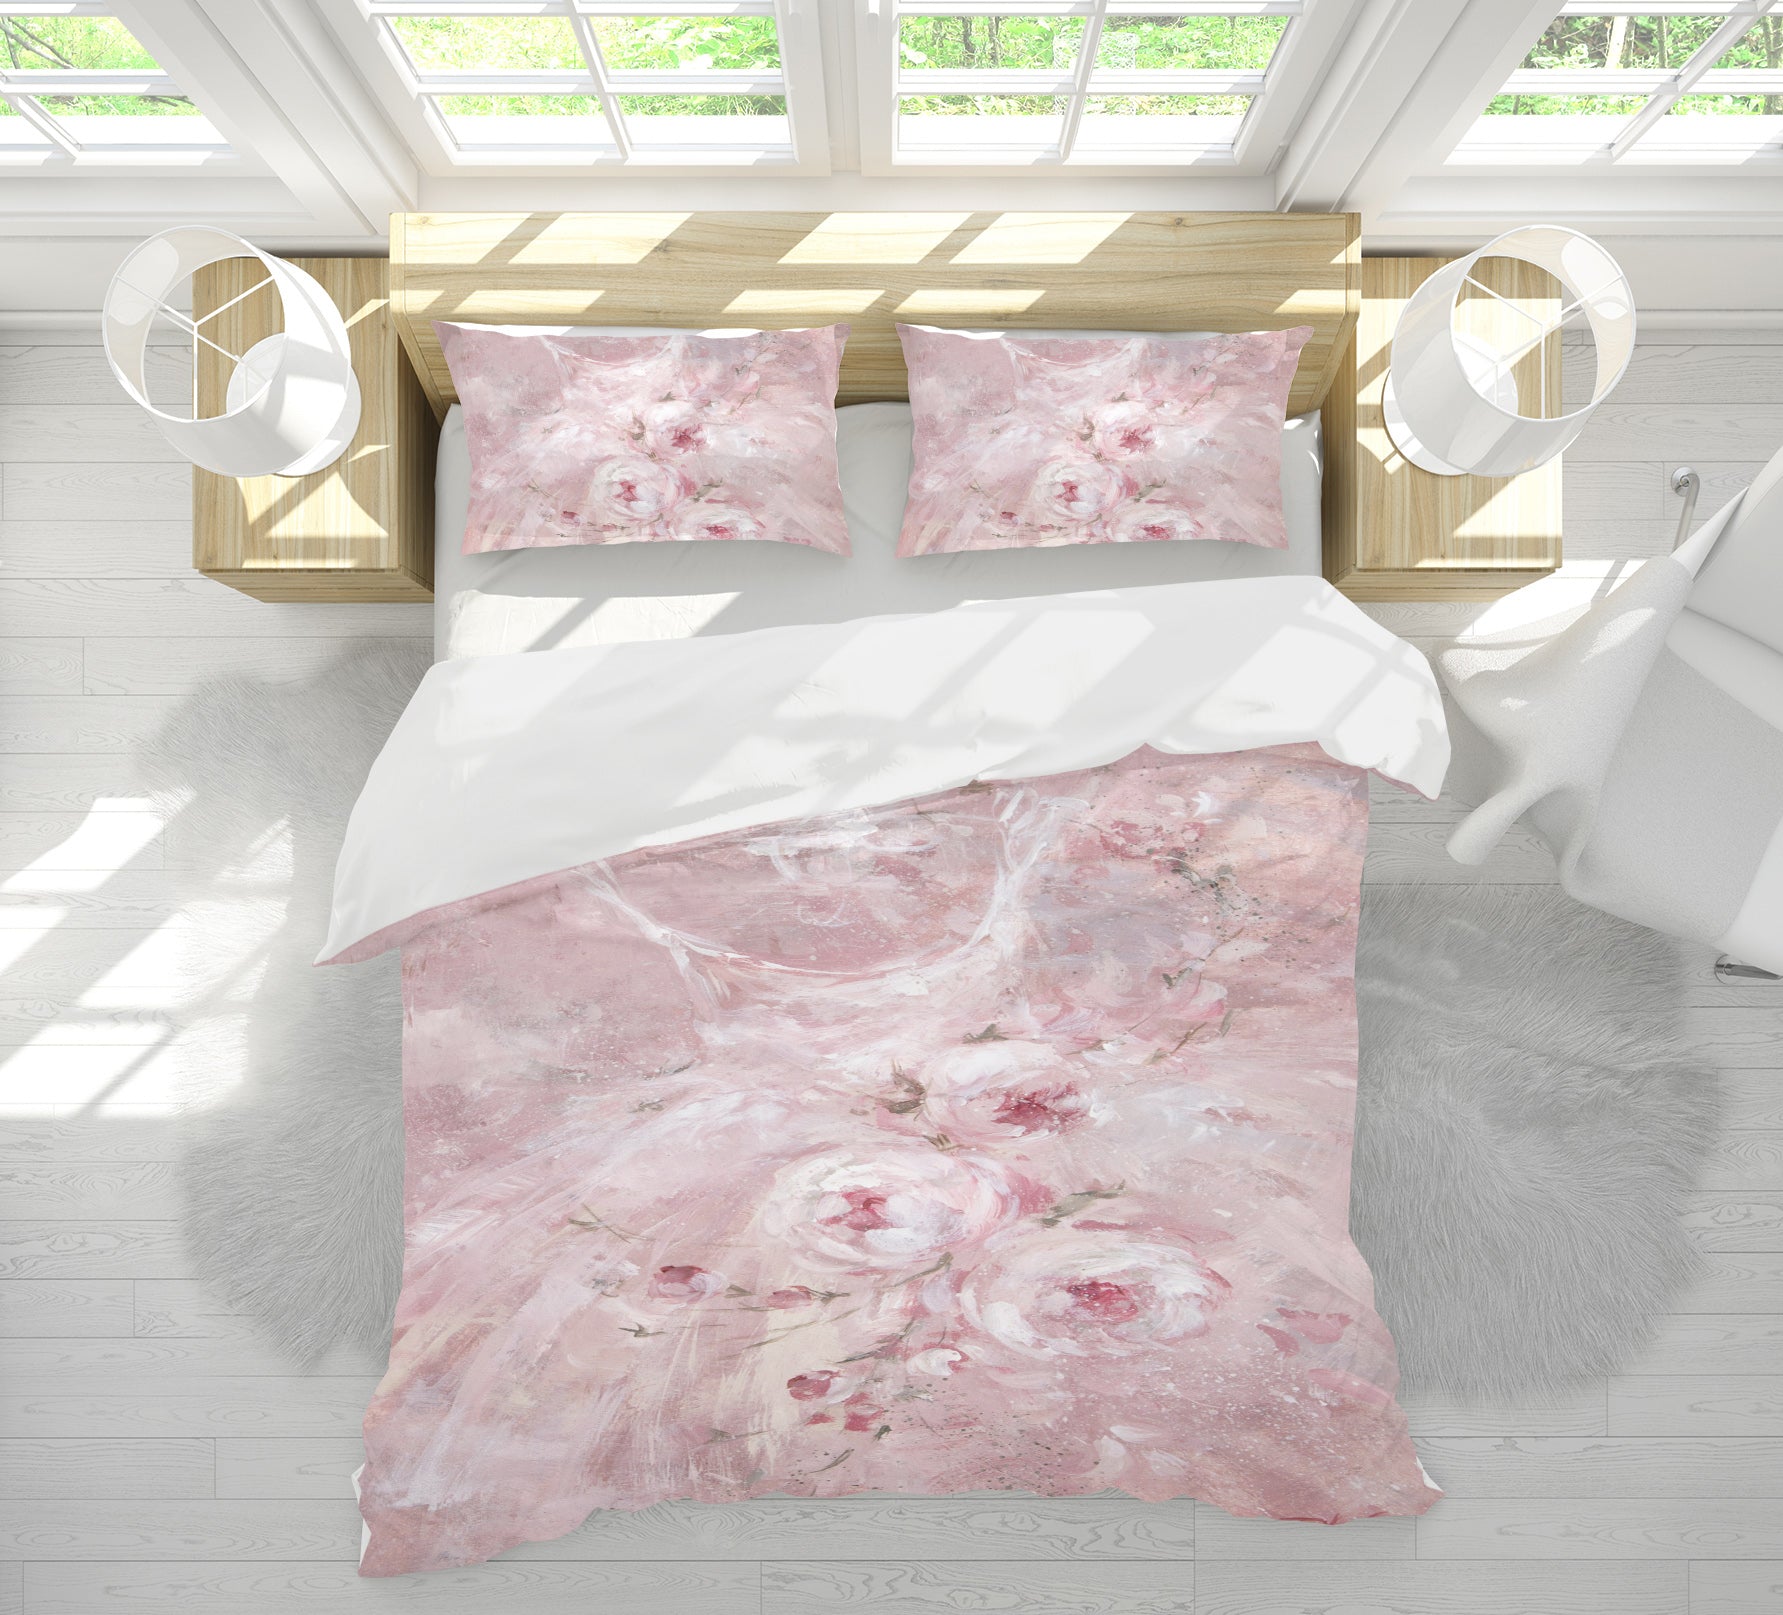 3D Pink Rose Skirt 2042 Debi Coules Bedding Bed Pillowcases Quilt